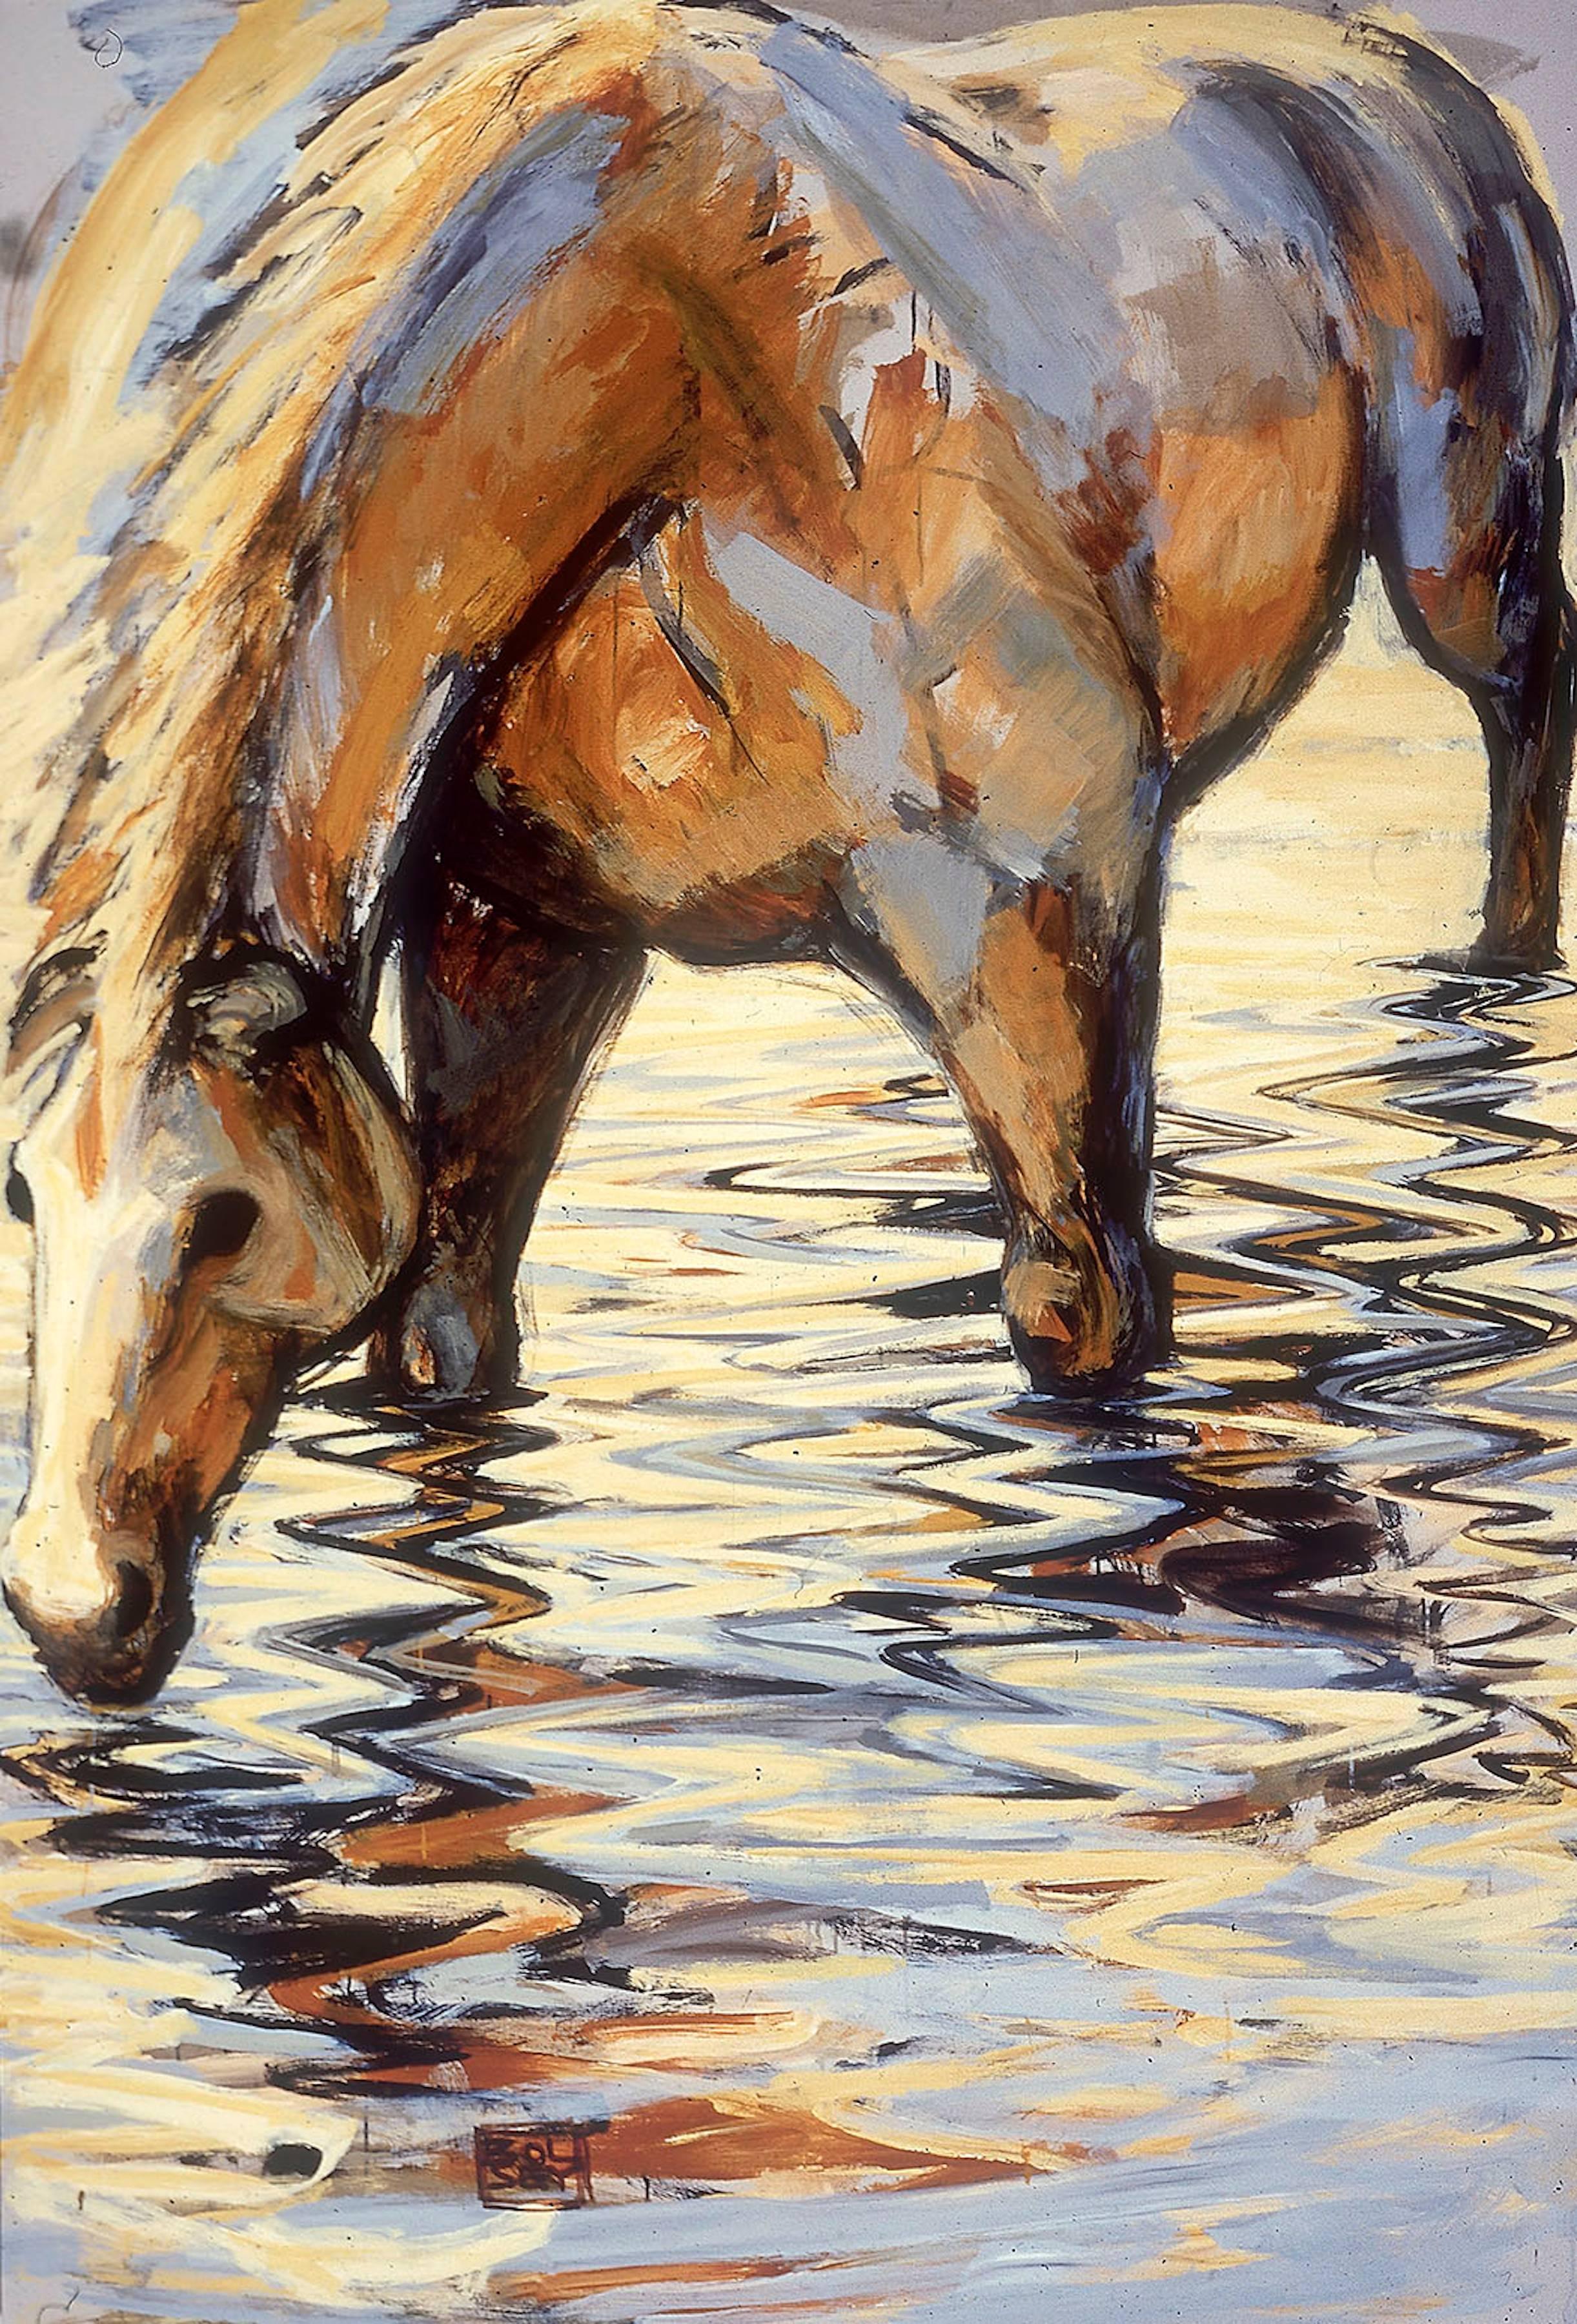 Carole Bolsey Animal Painting - "Wading" - Abstract Horse Painting 